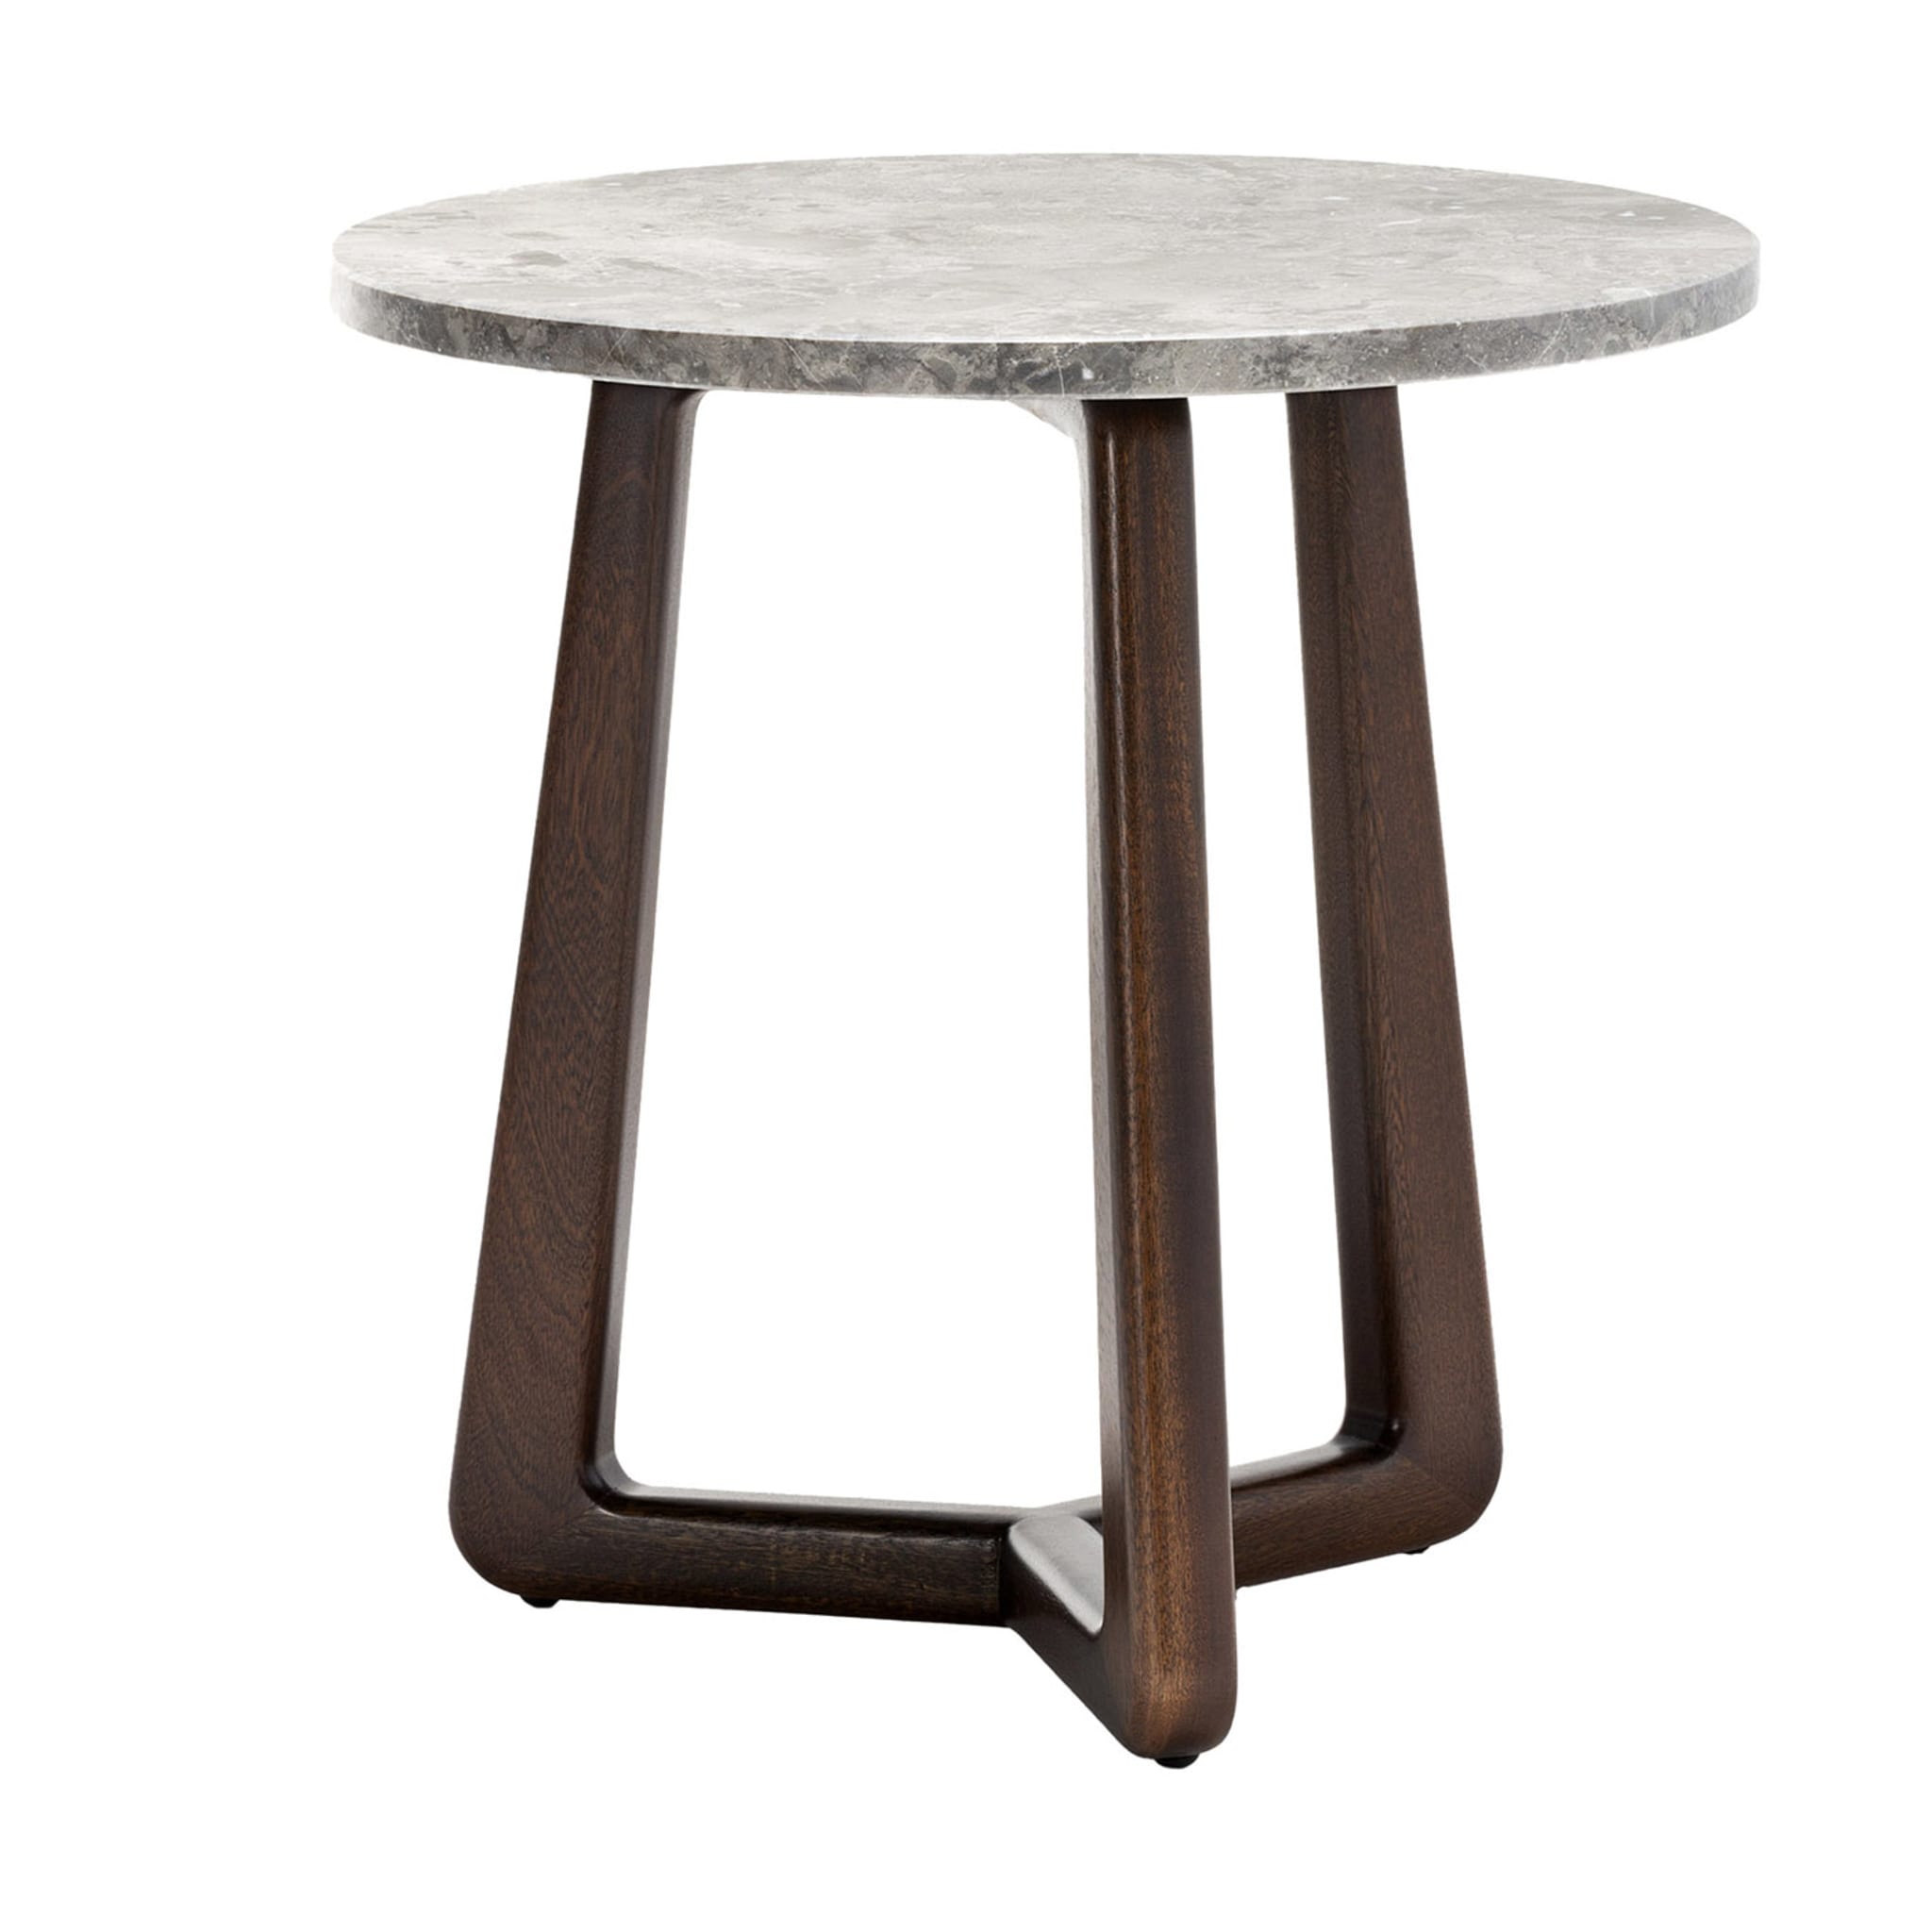 Sunset Small Sahara Grey Side Table by Paola Navone - Main view